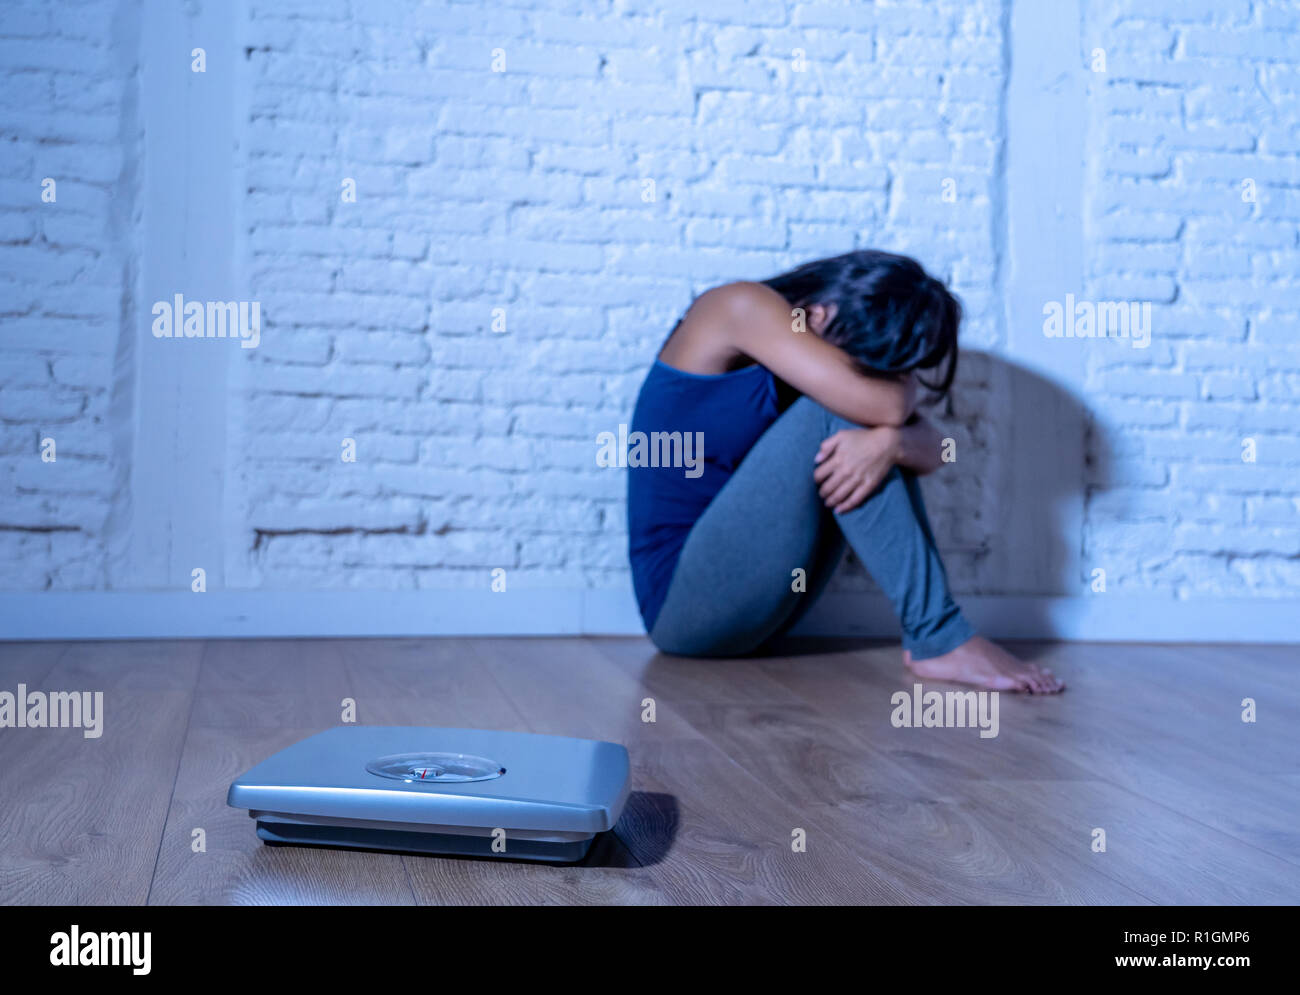 Young anorexic teenager woman sitting alone on ground looking at the scale worried and depressed in dieting and eating disorder concept Stock Photo